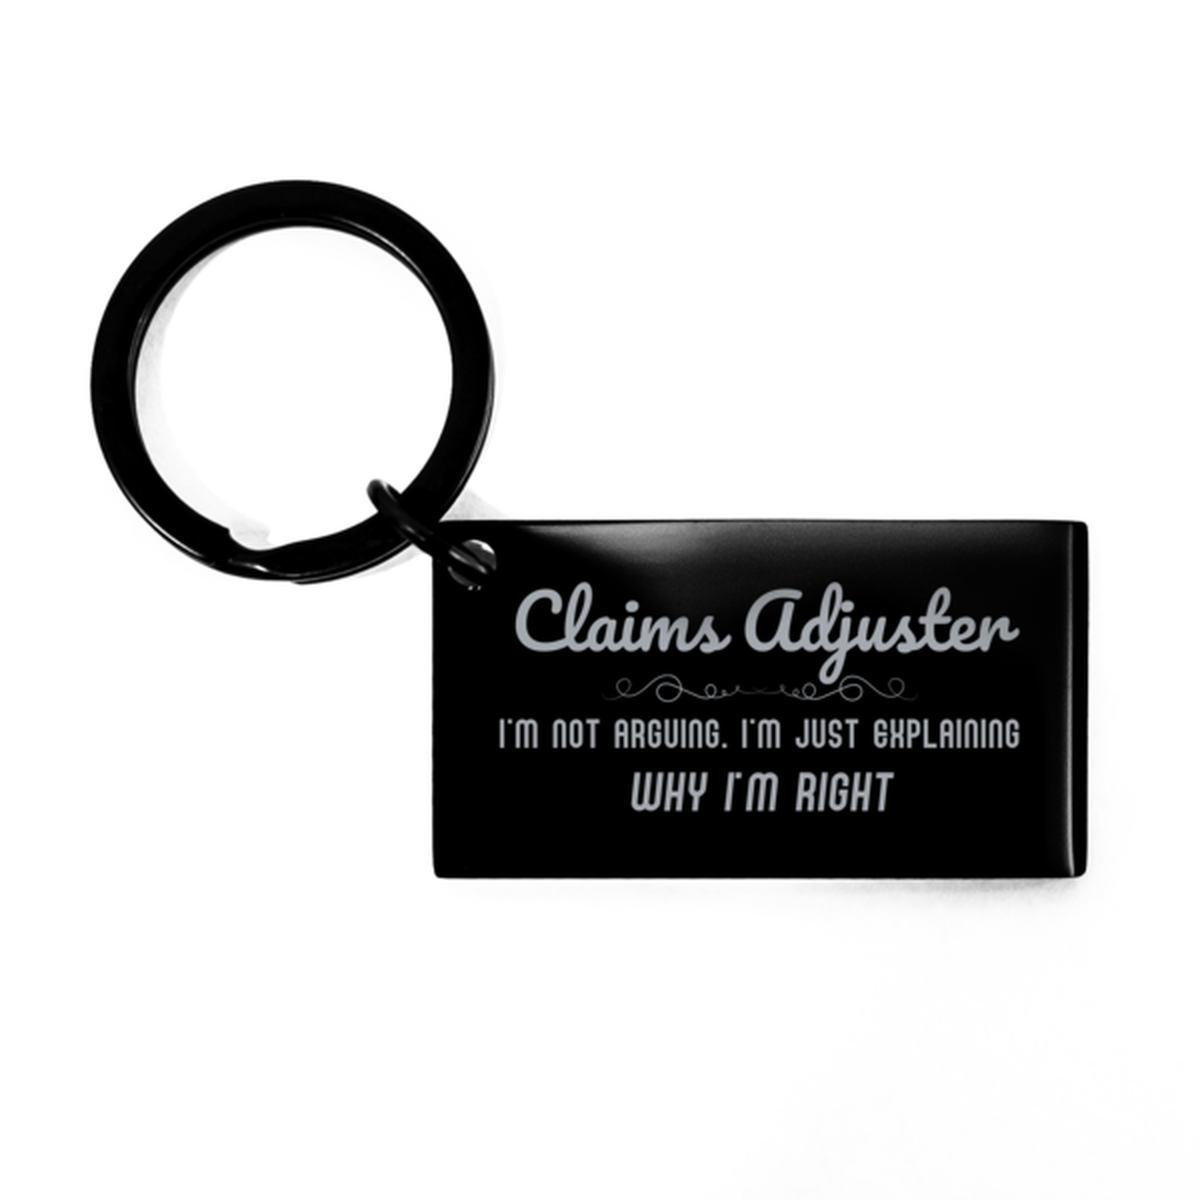 Claims Adjuster I'm not Arguing. I'm Just Explaining Why I'm RIGHT Keychain, Funny Saying Quote Claims Adjuster Gifts For Claims Adjuster Graduation Birthday Christmas Gifts for Men Women Coworker